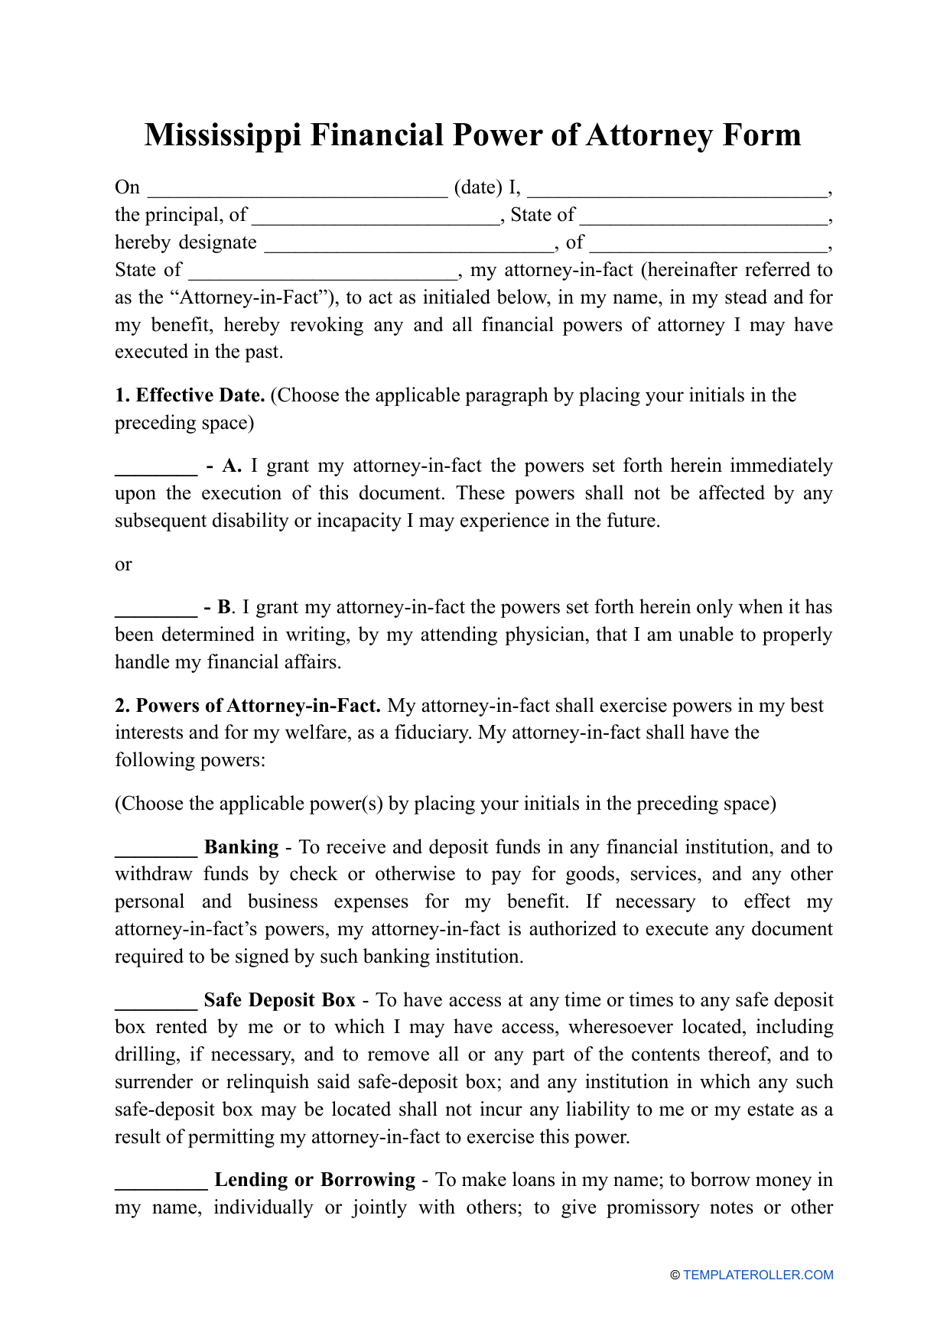 Financial Power of Attorney Form - Mississippi, Page 1